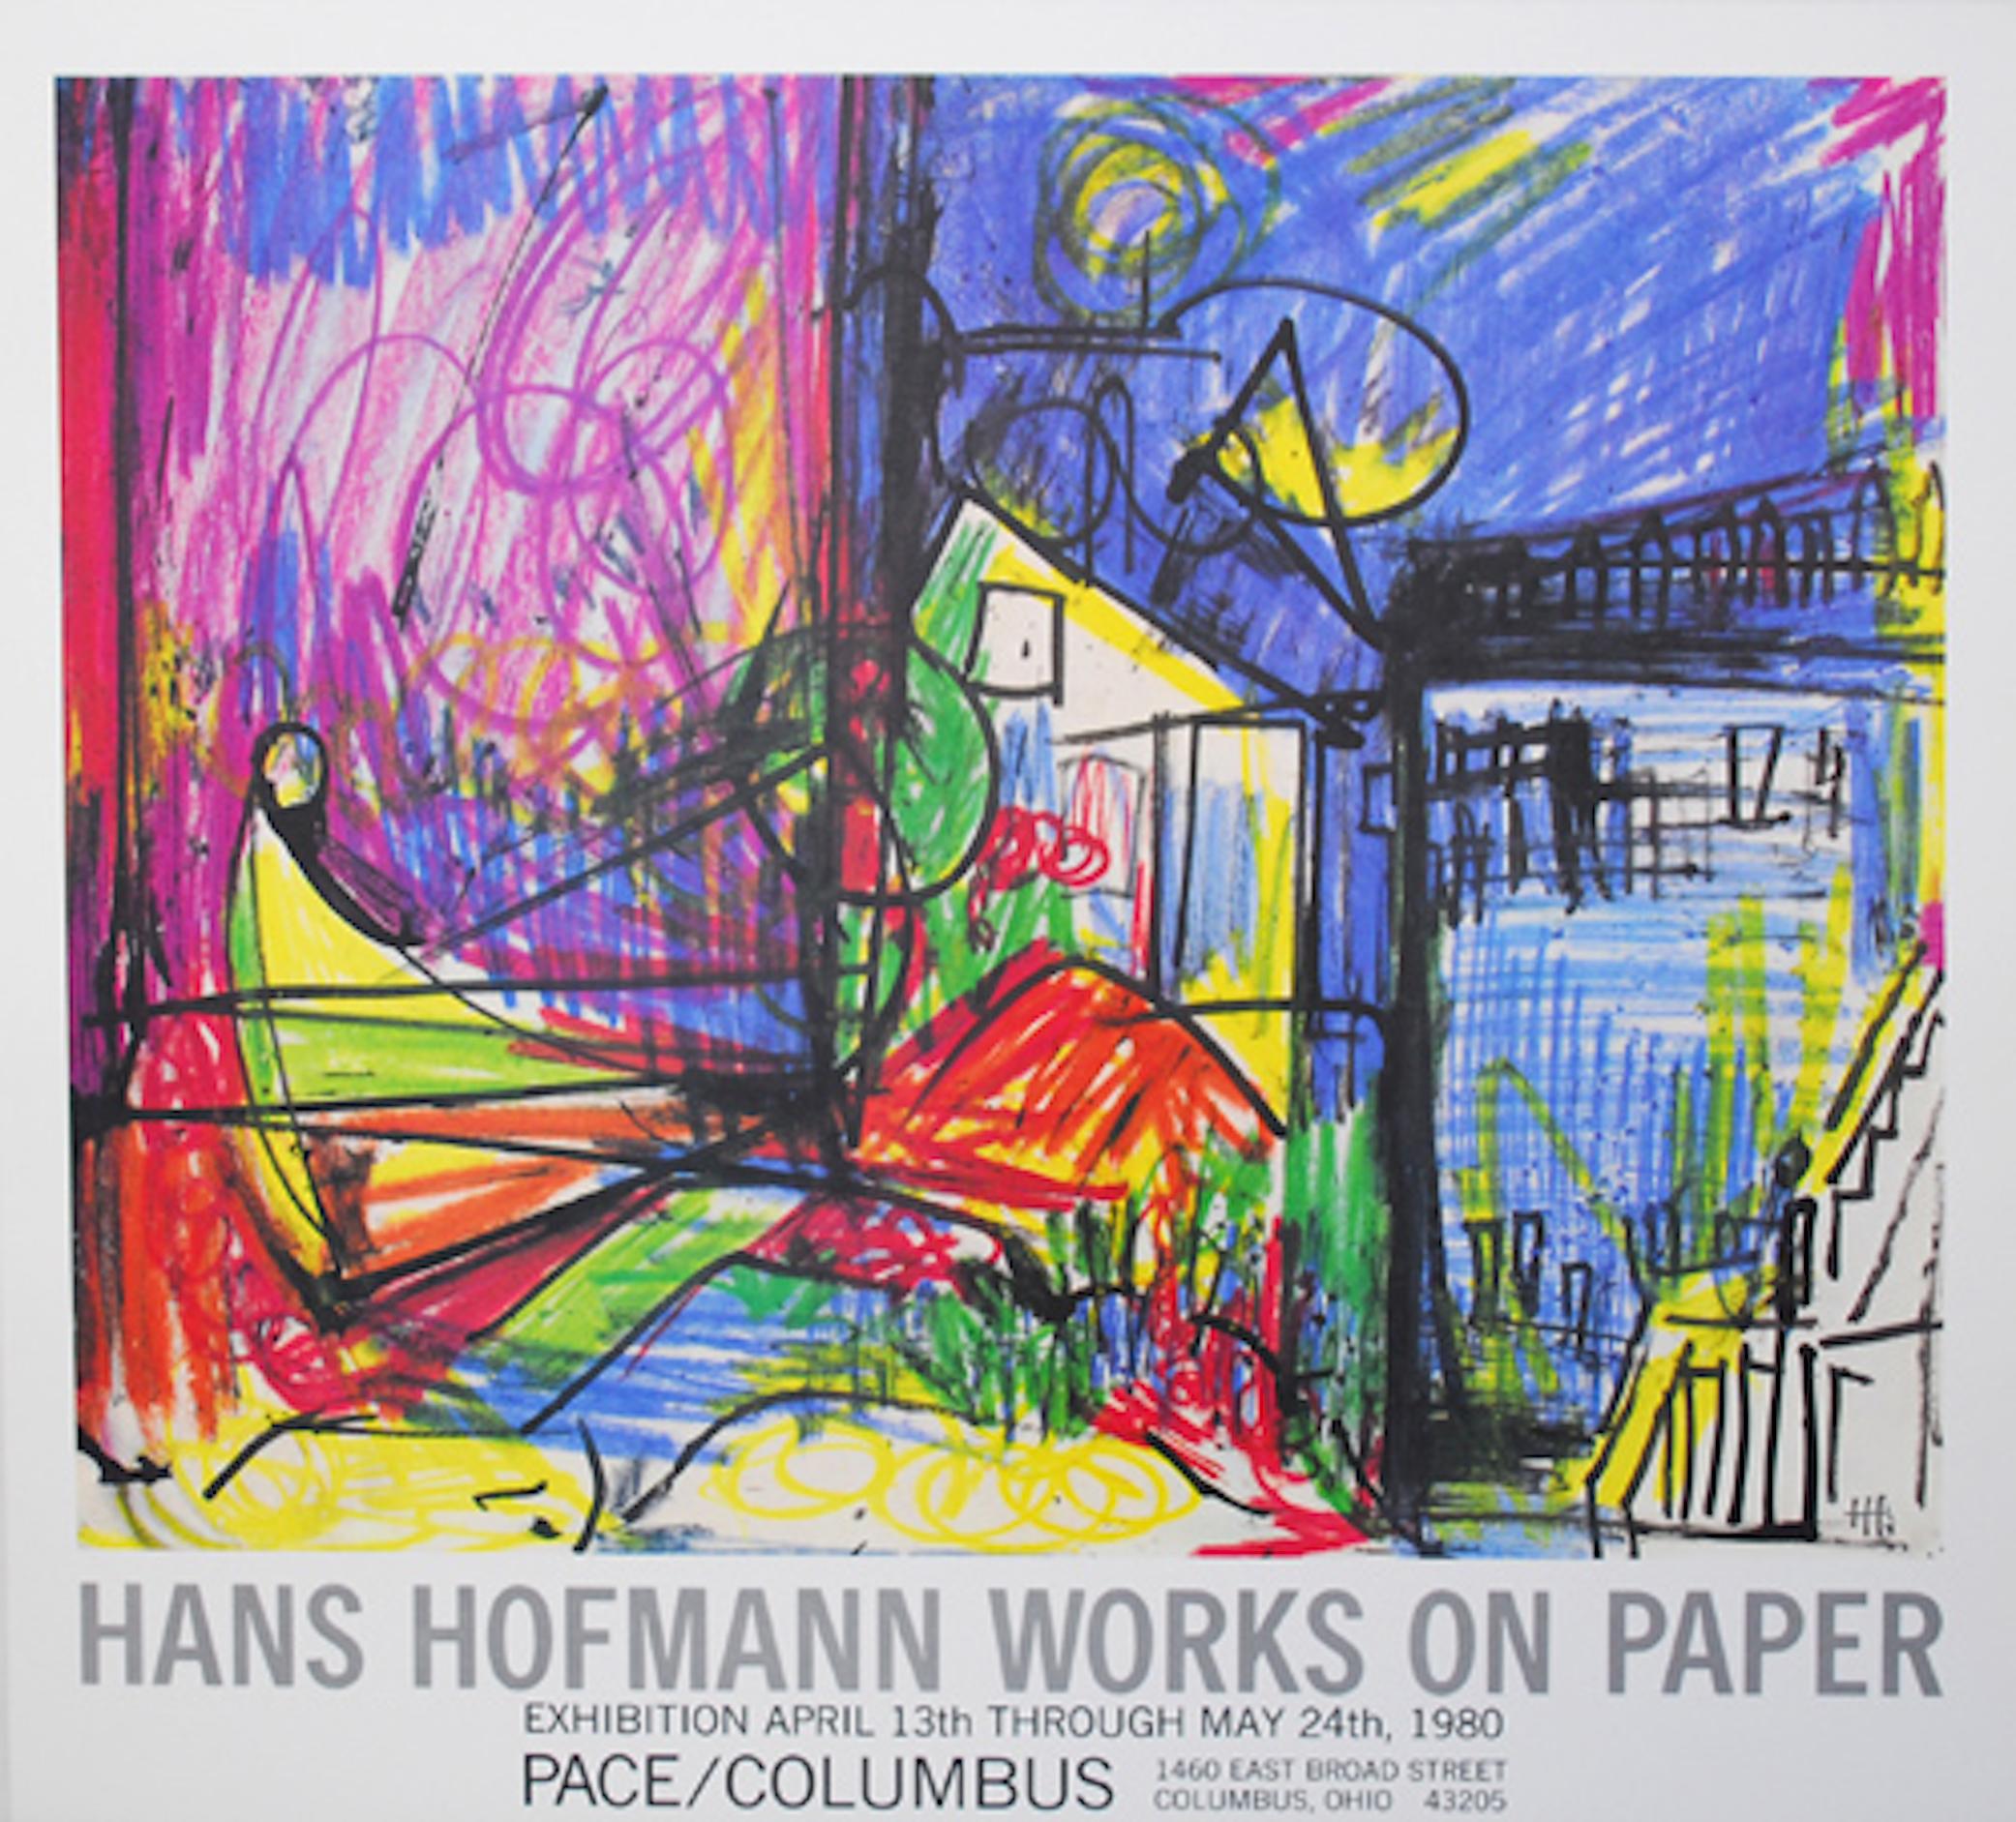 What is Hans Hoffman famous for?